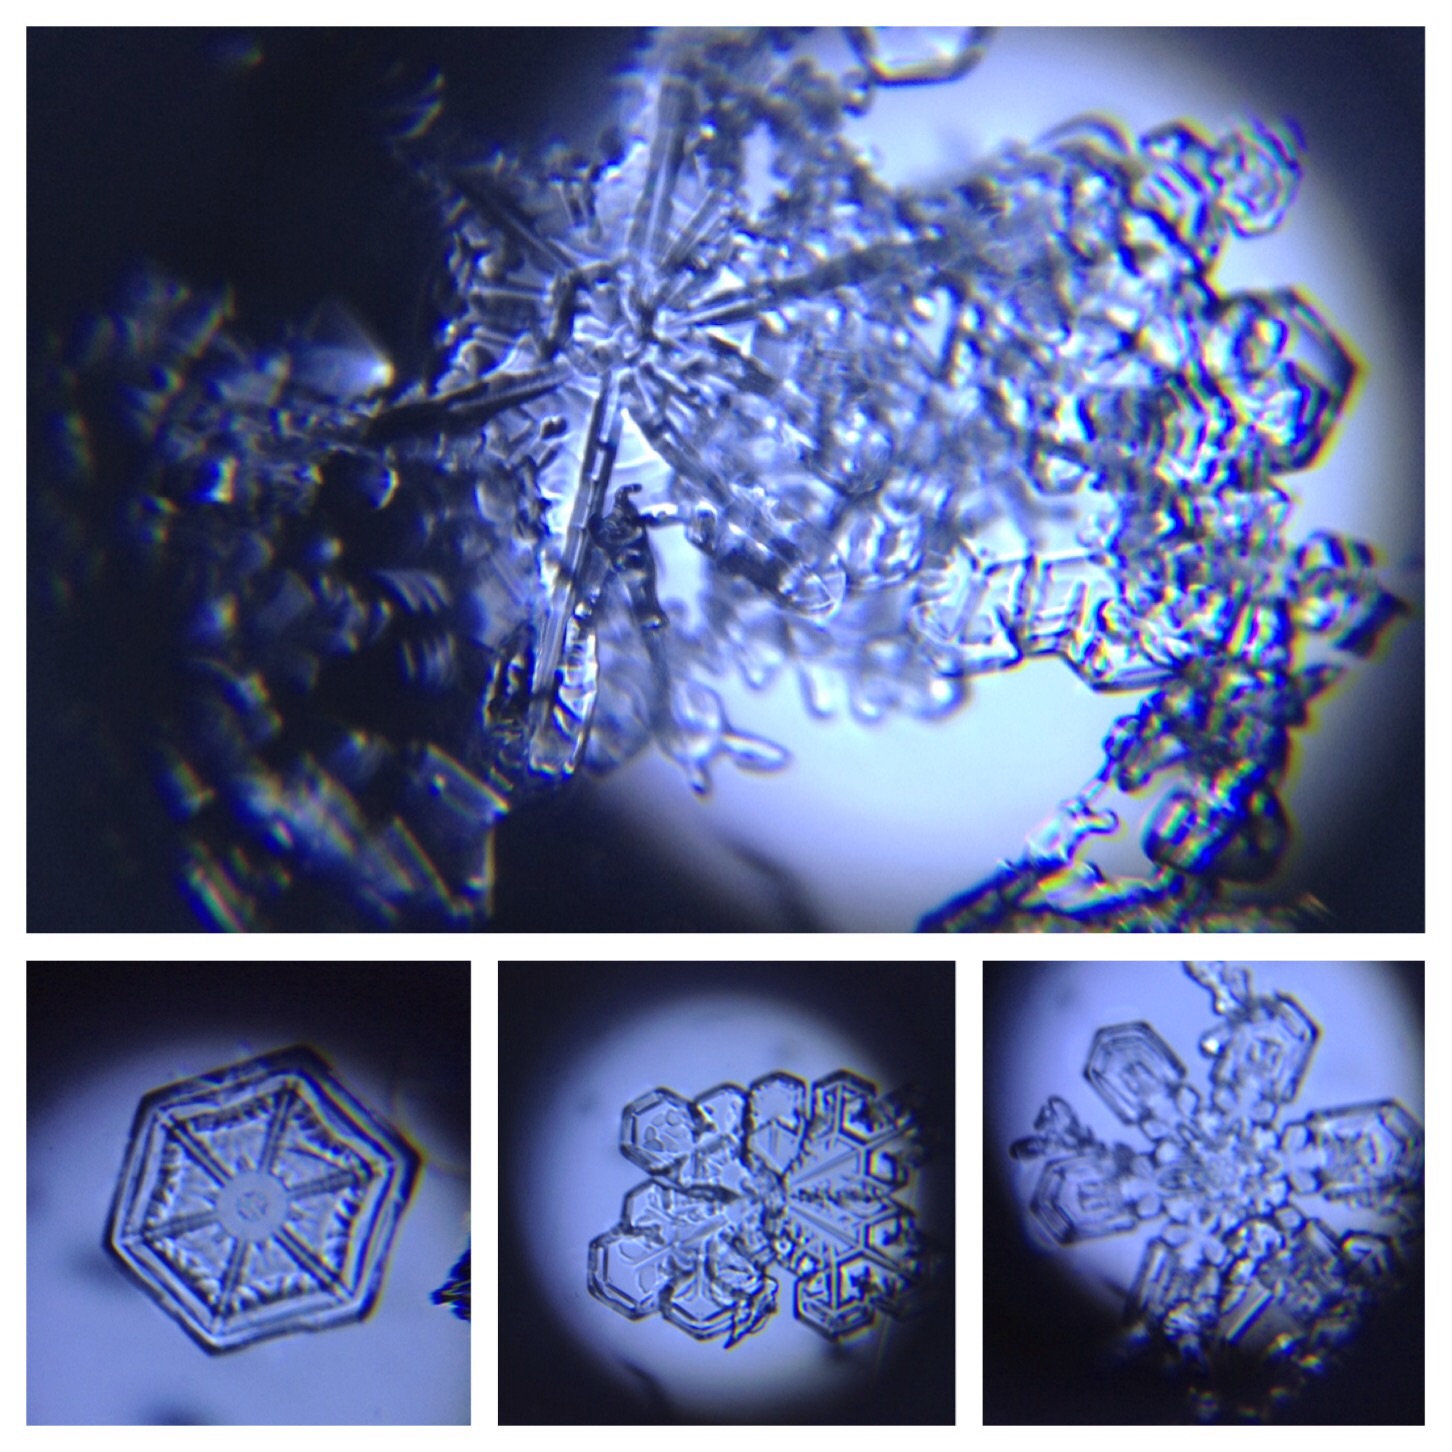 Why Are All Snowflakes Different? | Wonderopolis